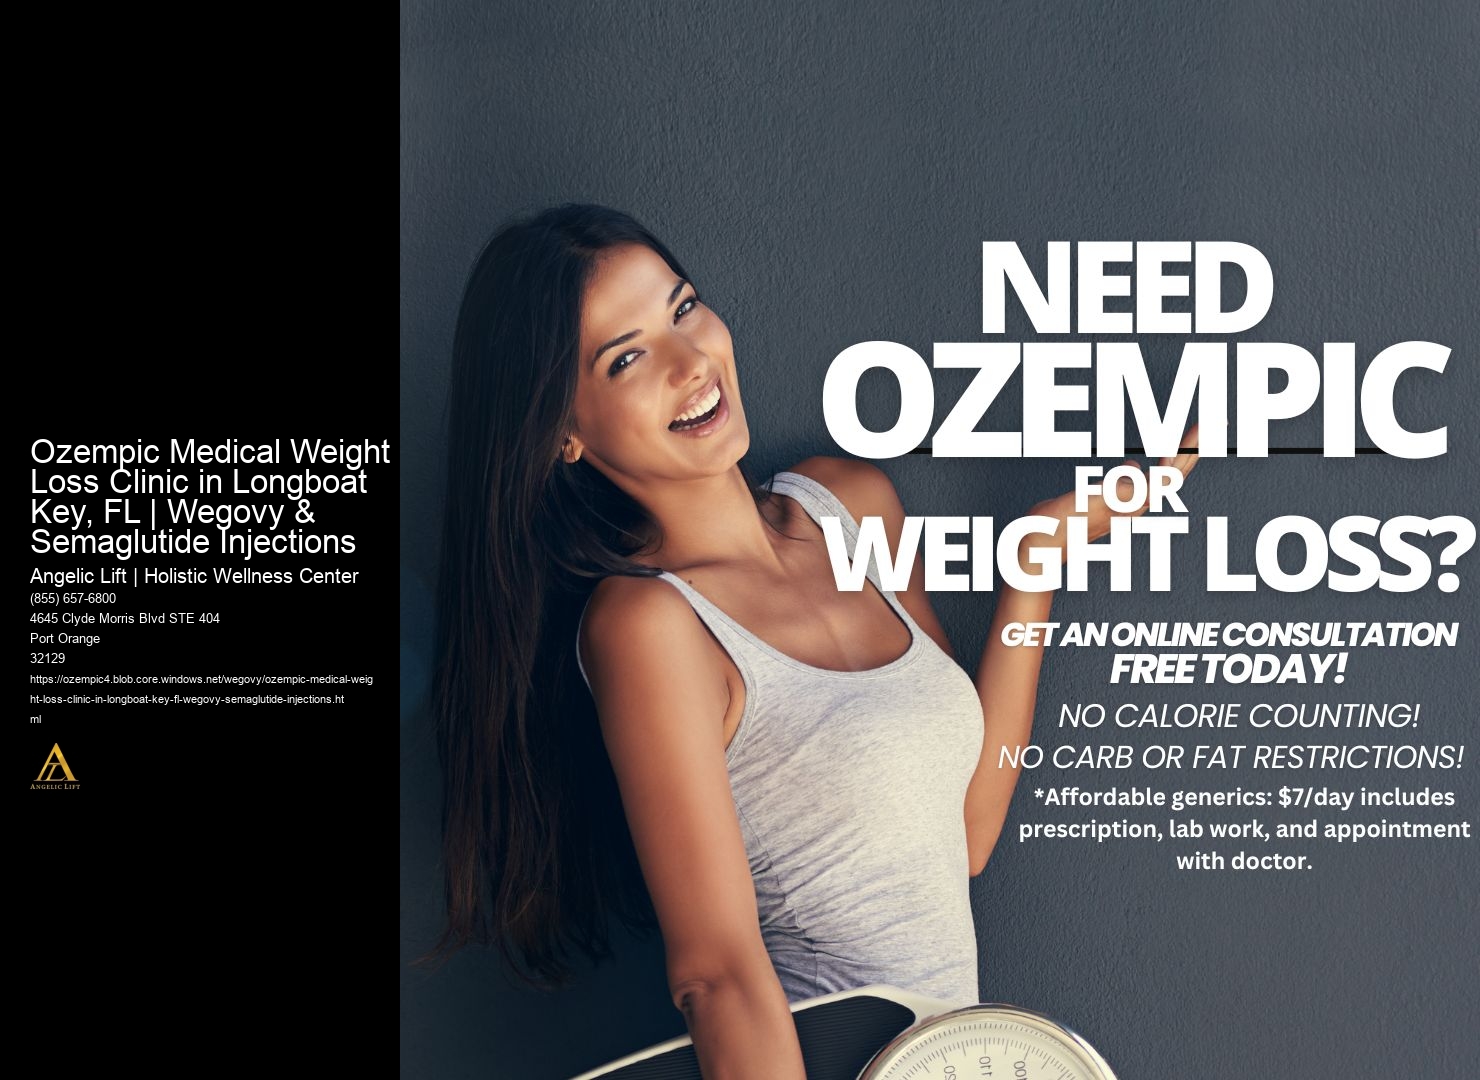 Ozempic Medical Weight Loss Clinic in Longboat Key, FL | Wegovy & Semaglutide Injections